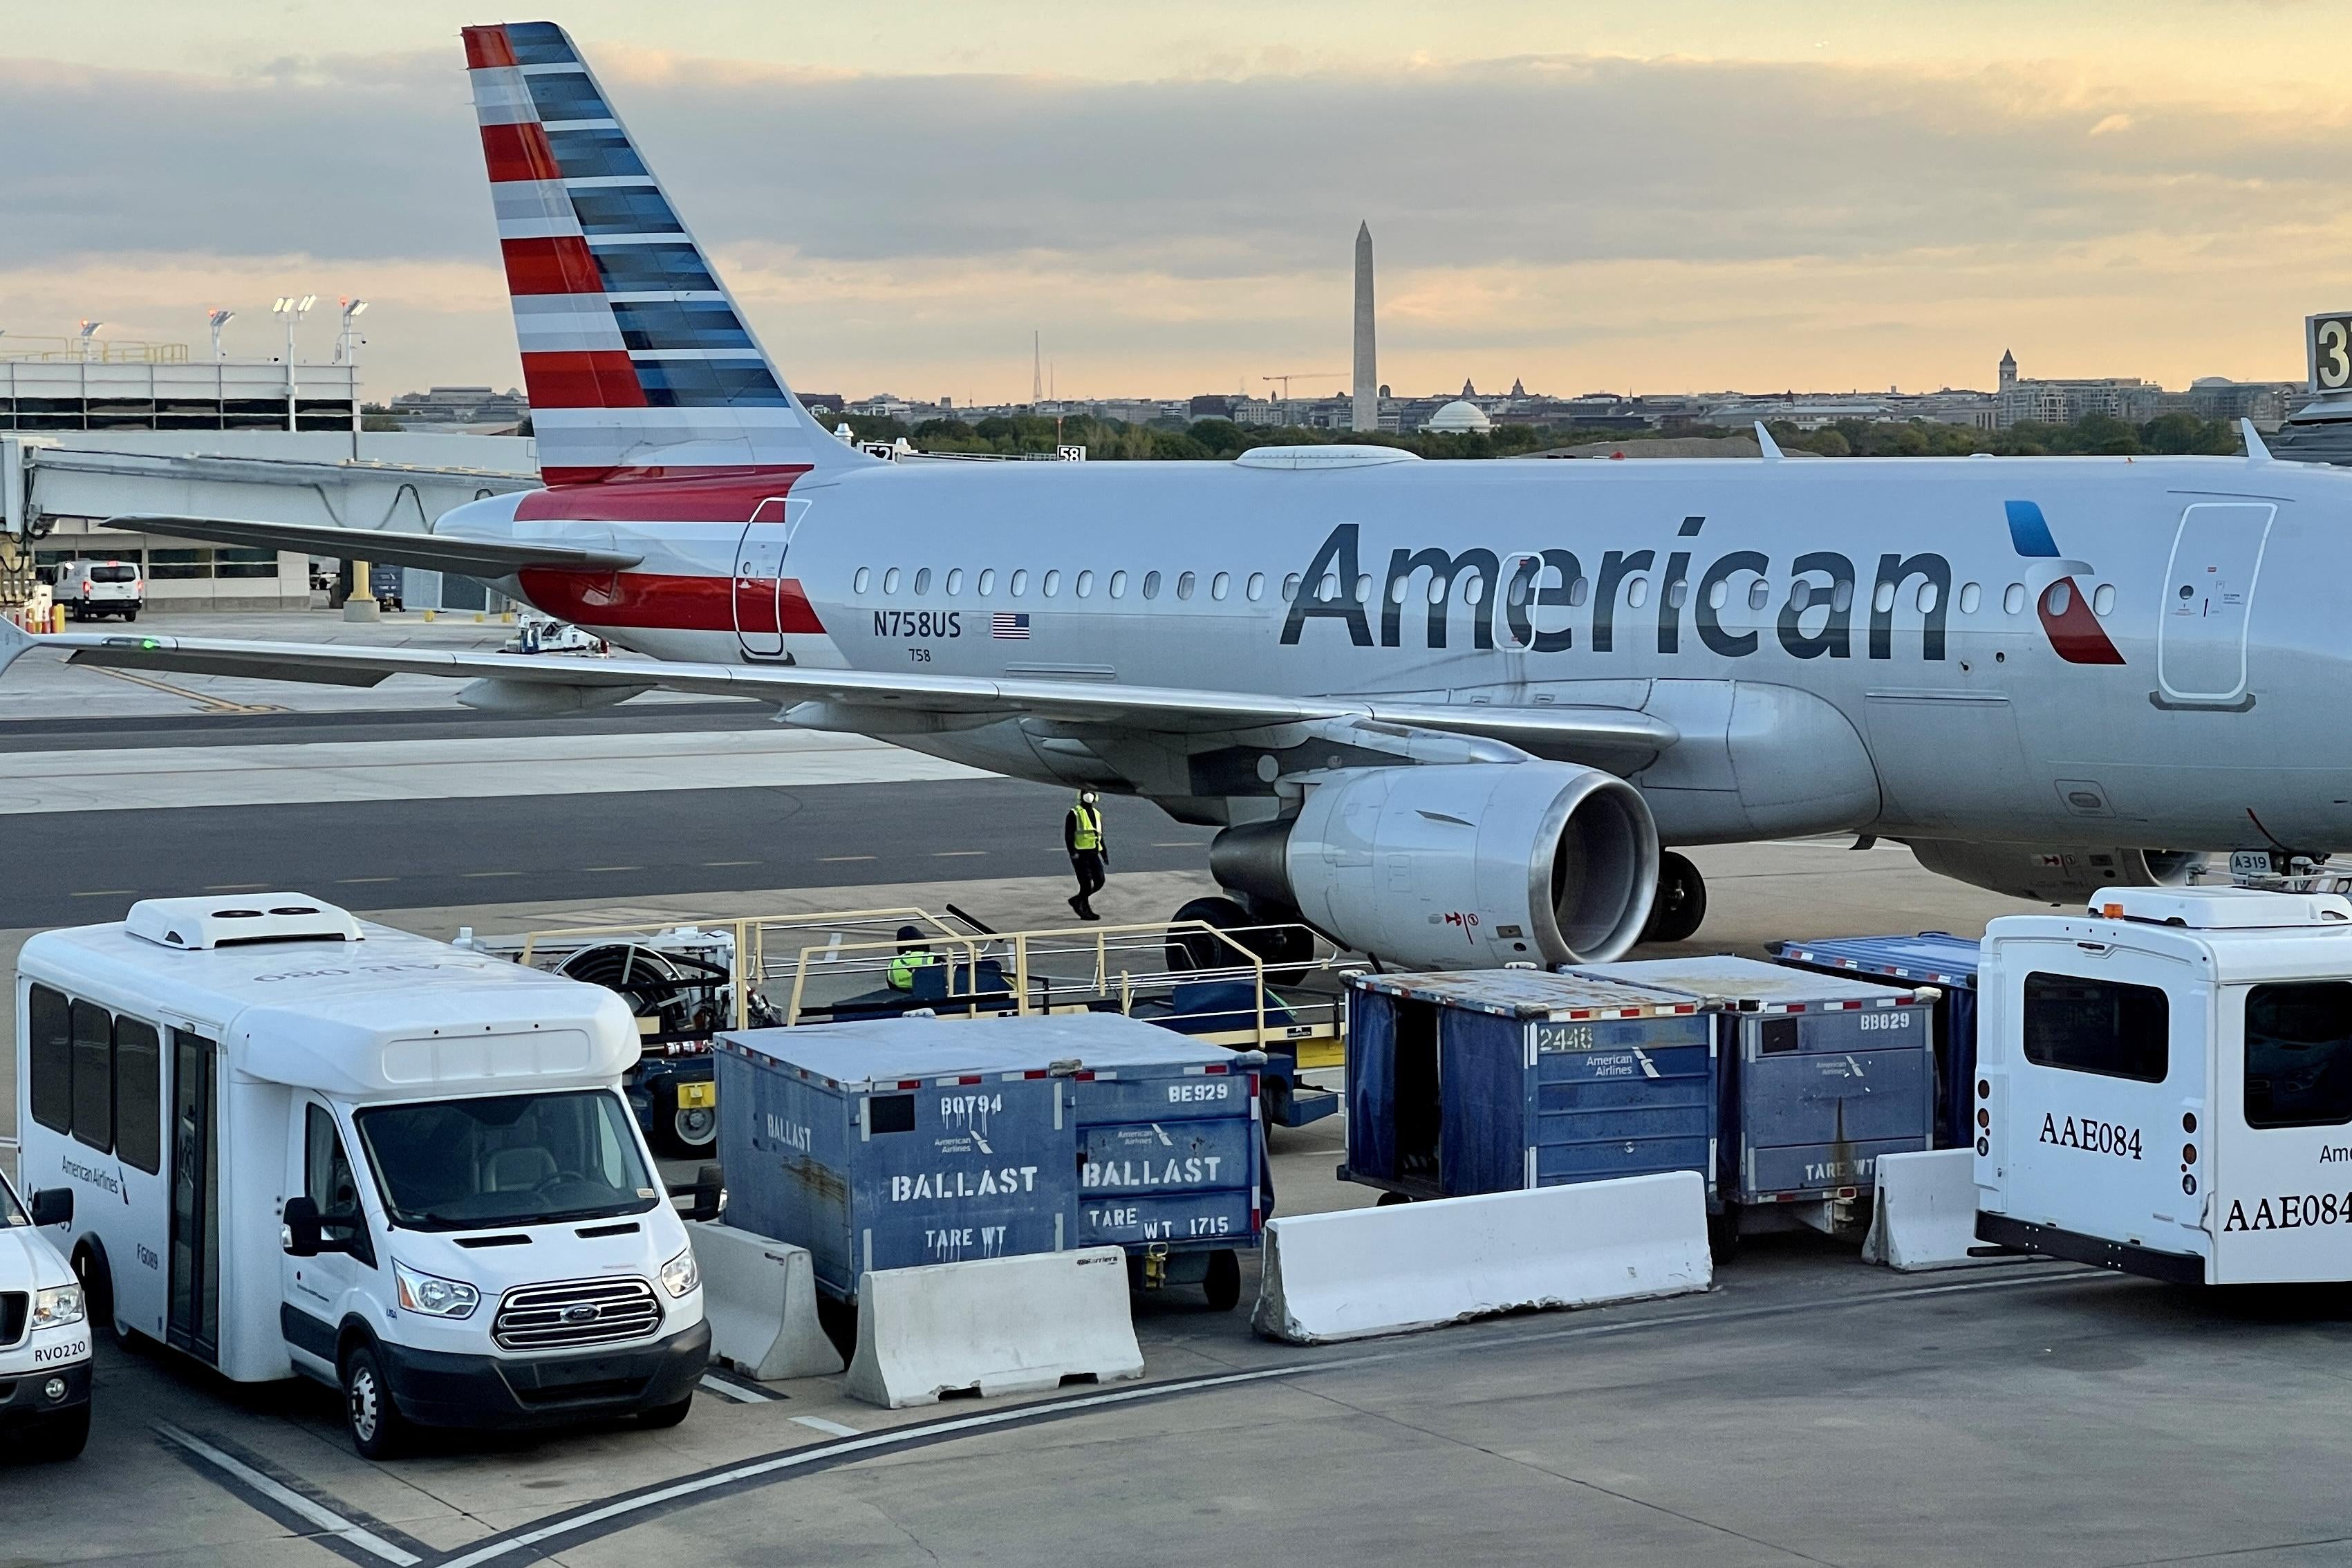 An American Airlines plane is seen at sunrise on the tarmac of the Reagan Washington National Airport (DCA) in Arlington, Virginia, on April 22, 2021. 